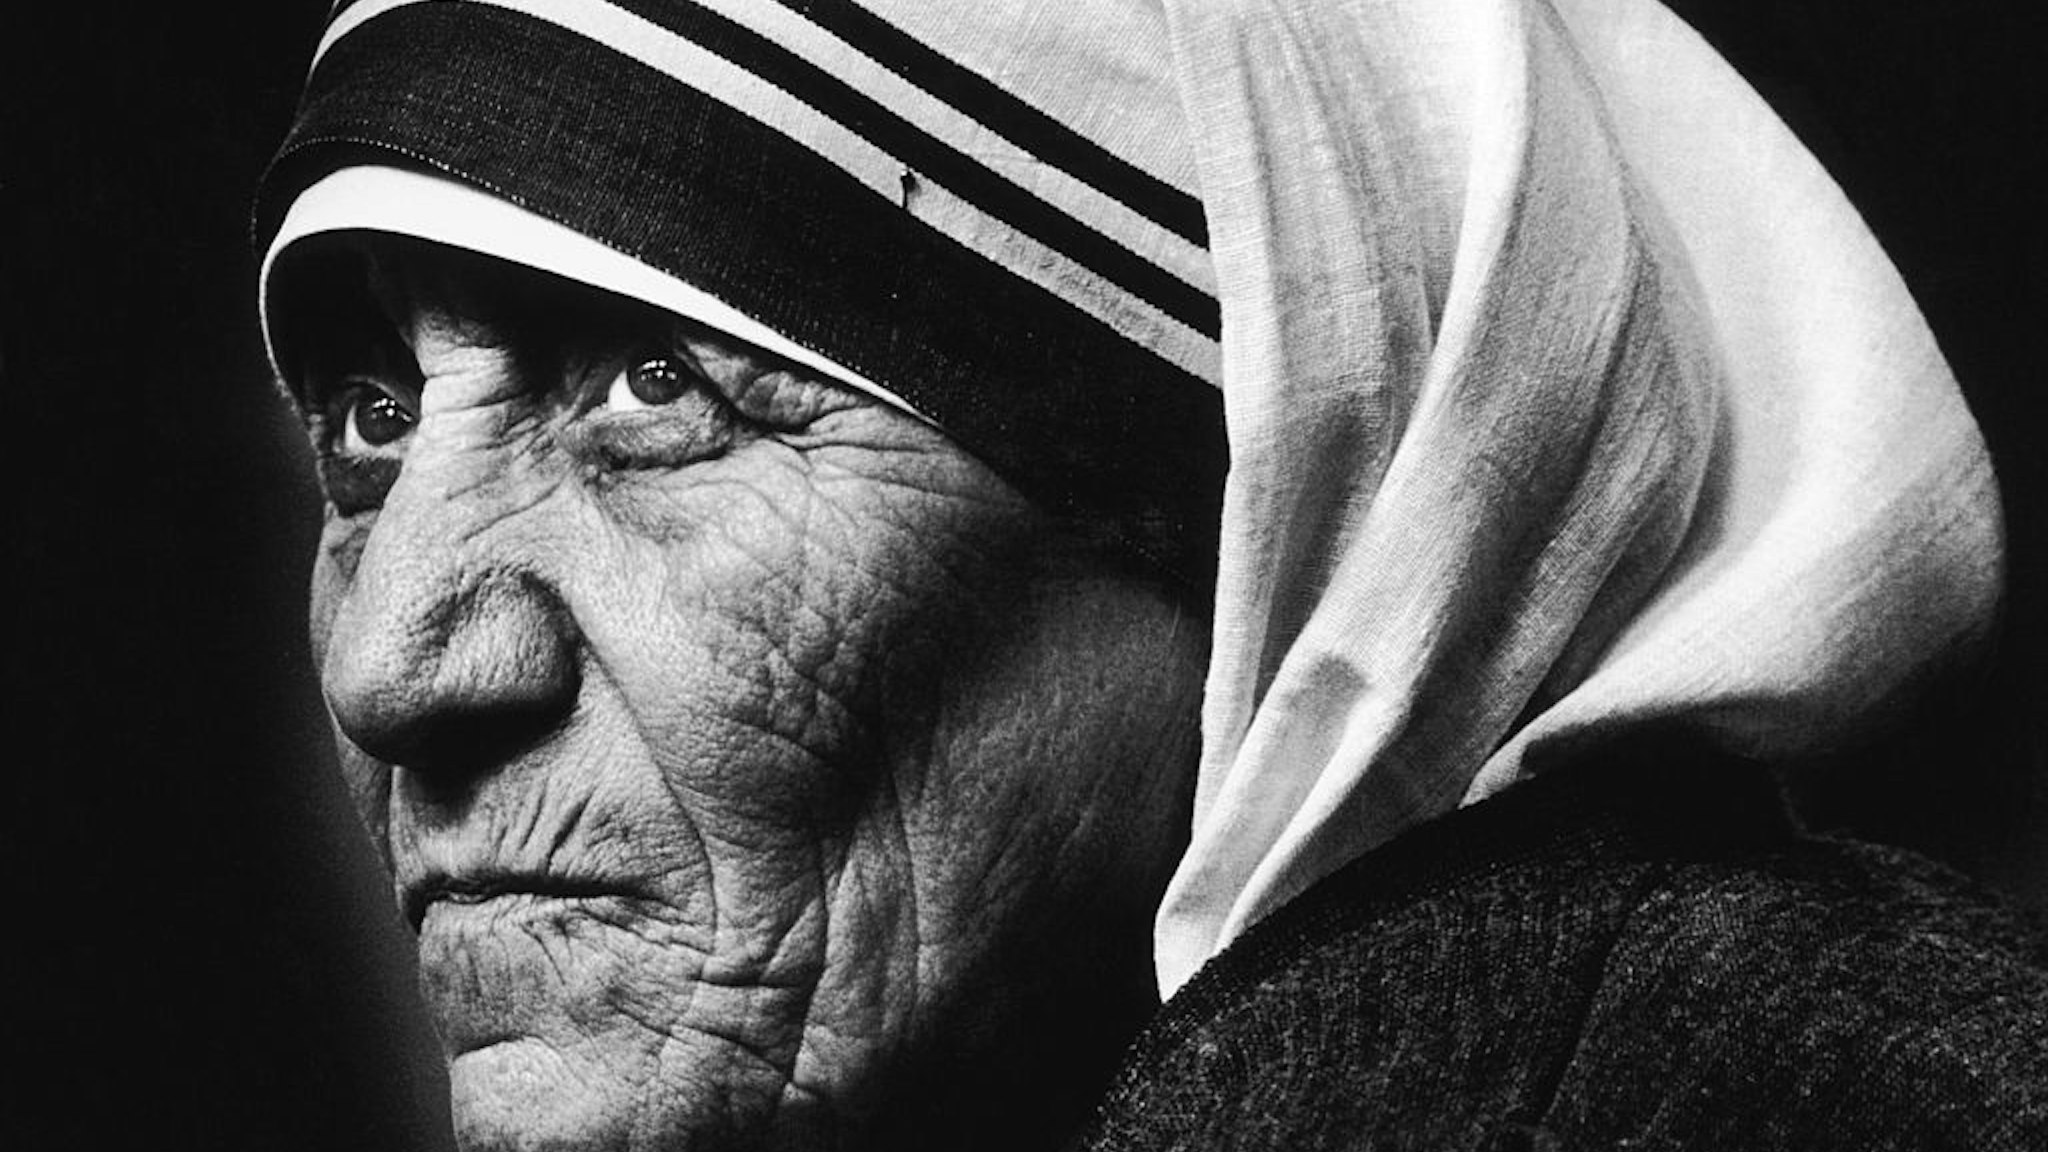 Mother Teresa of Calcutta (1910 - 1997) visits St James' Church in Piccadilly, London, 8th July 1981. (Photo by John Downing/Getty Images)